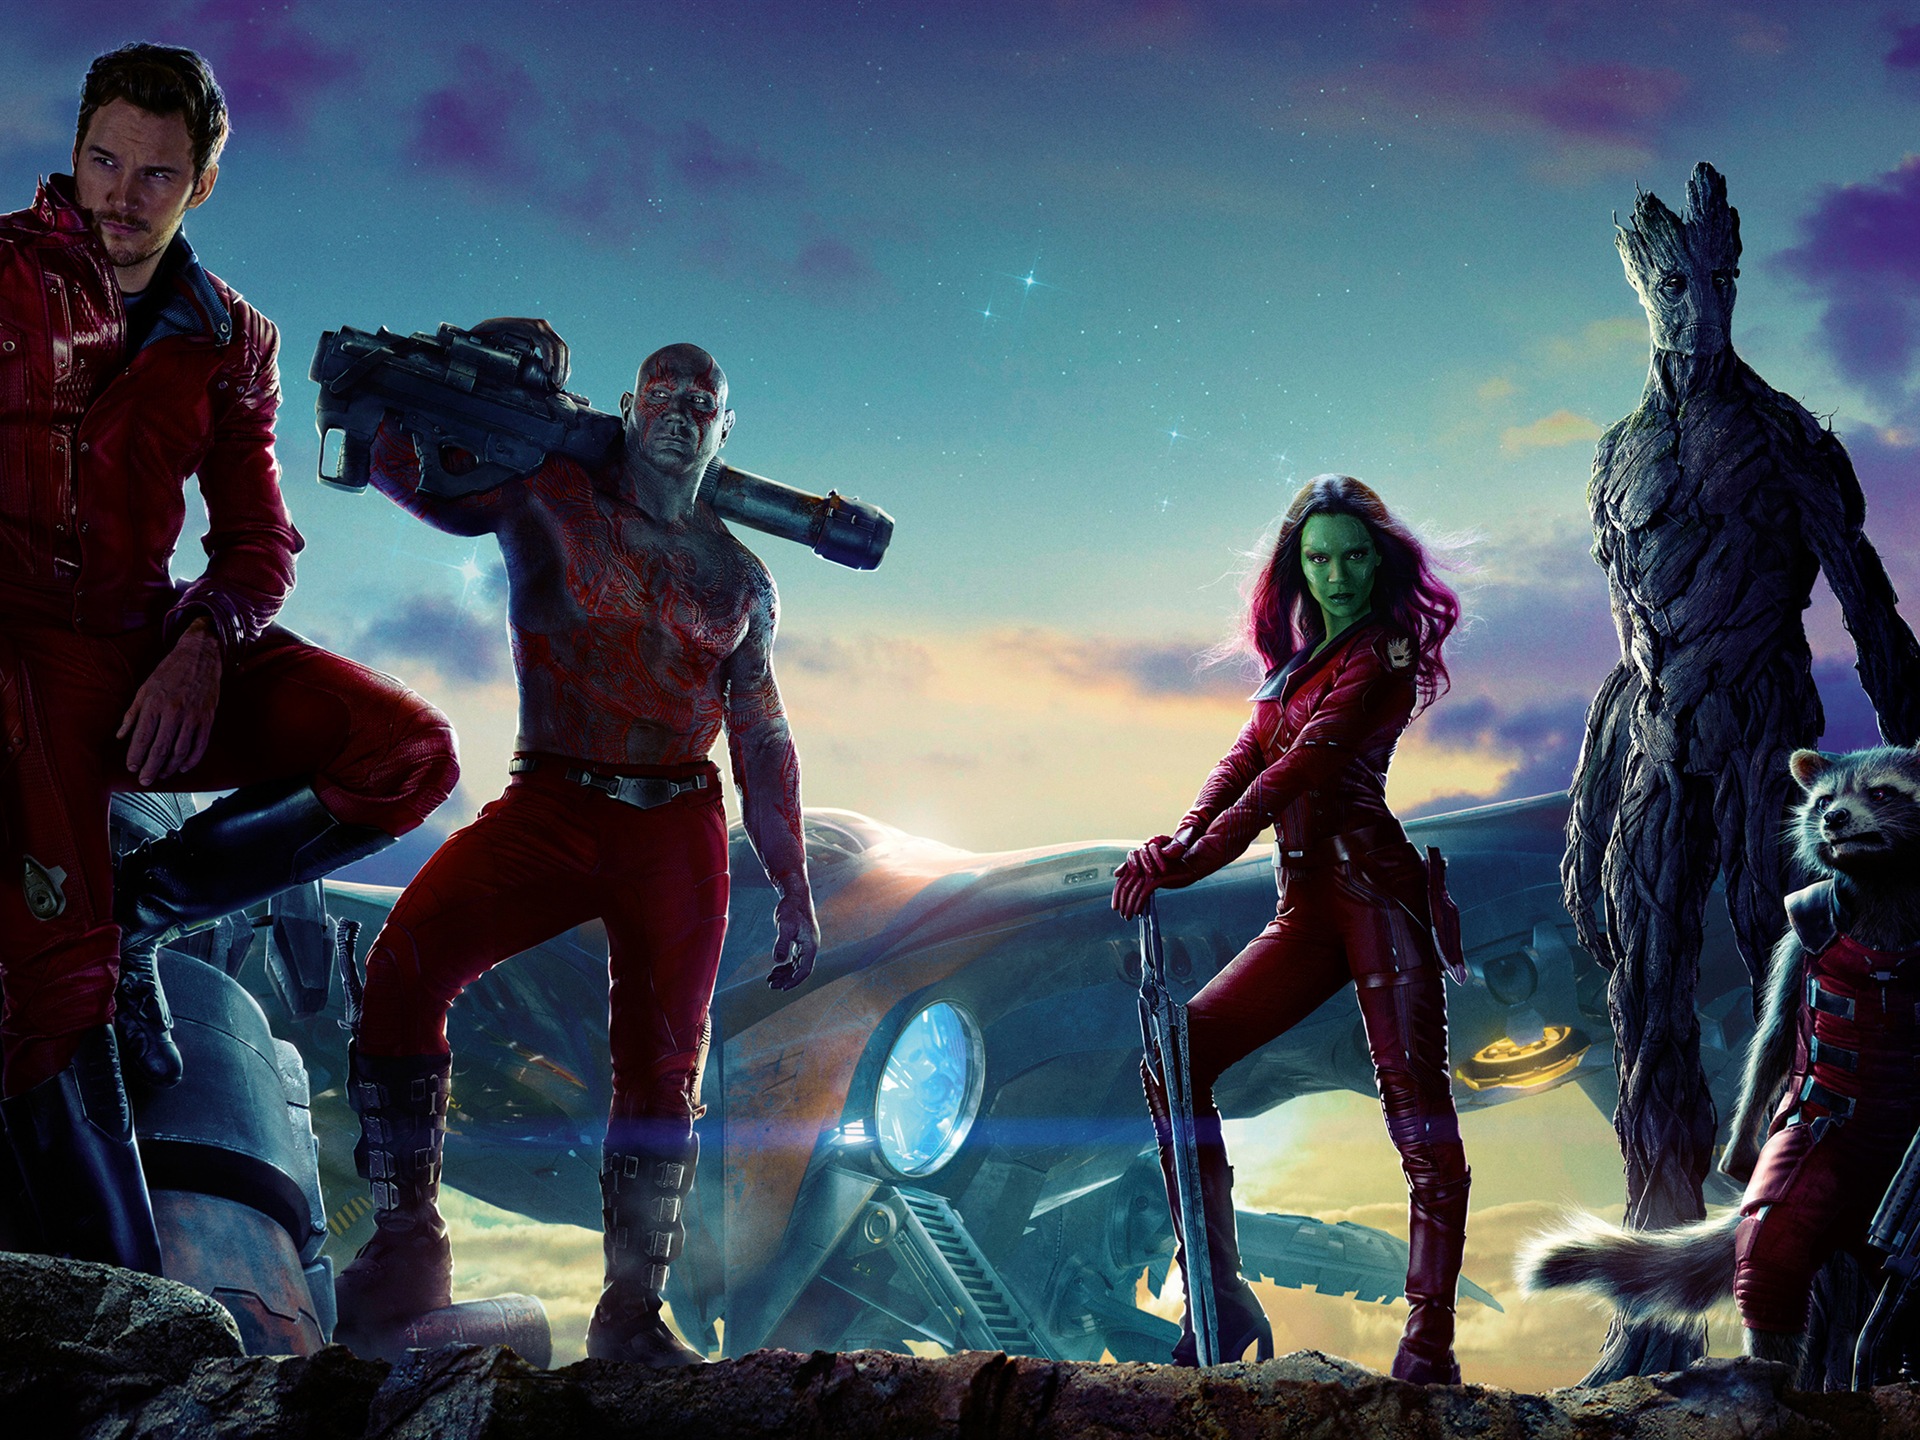 Guardians of the Galaxy 2014 HD movie wallpapers #4 - 1920x1440